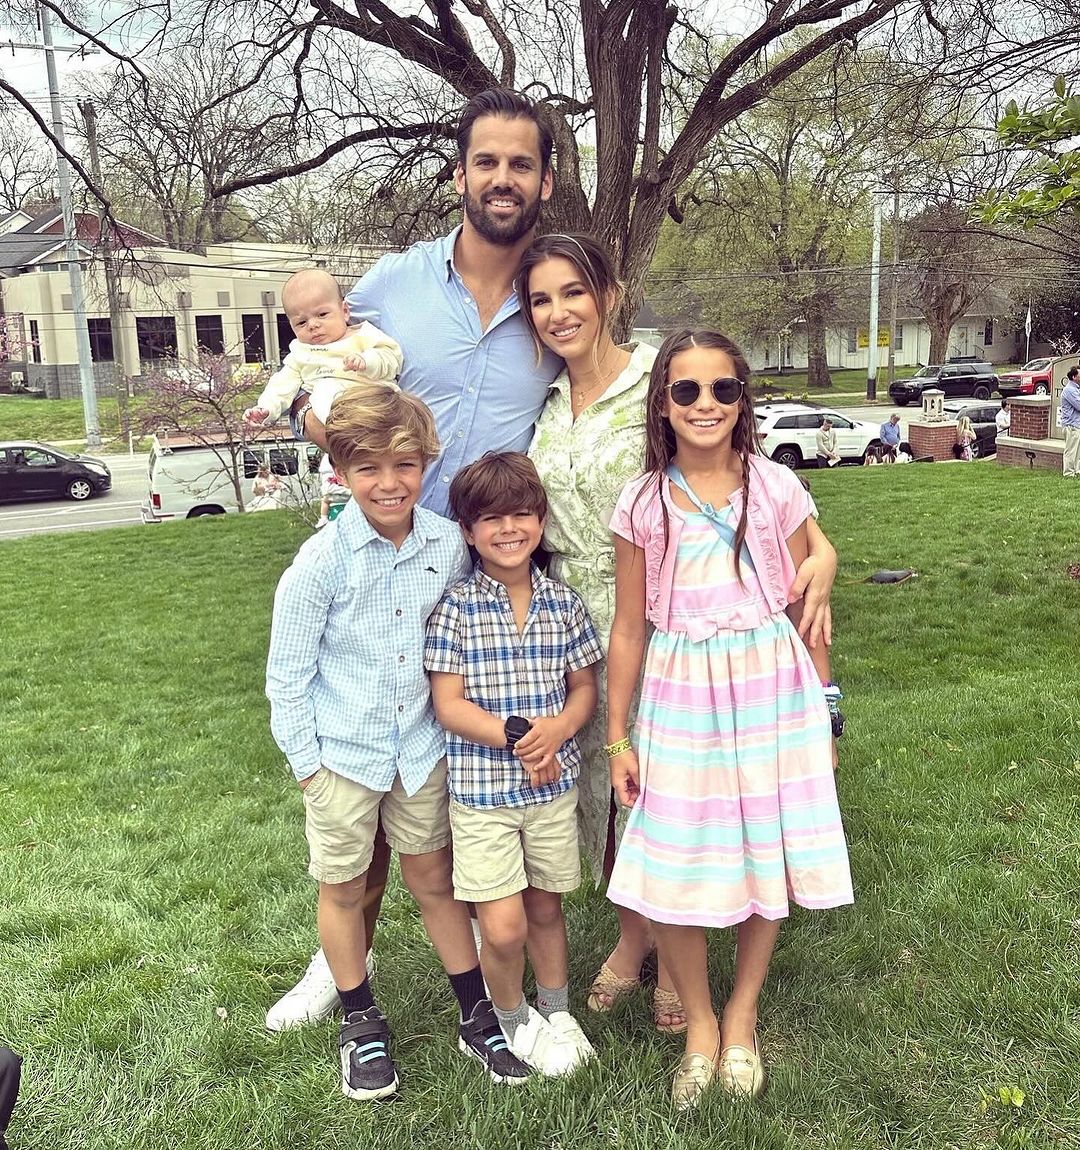 They celebrated their first Easter with Denver earlier this month